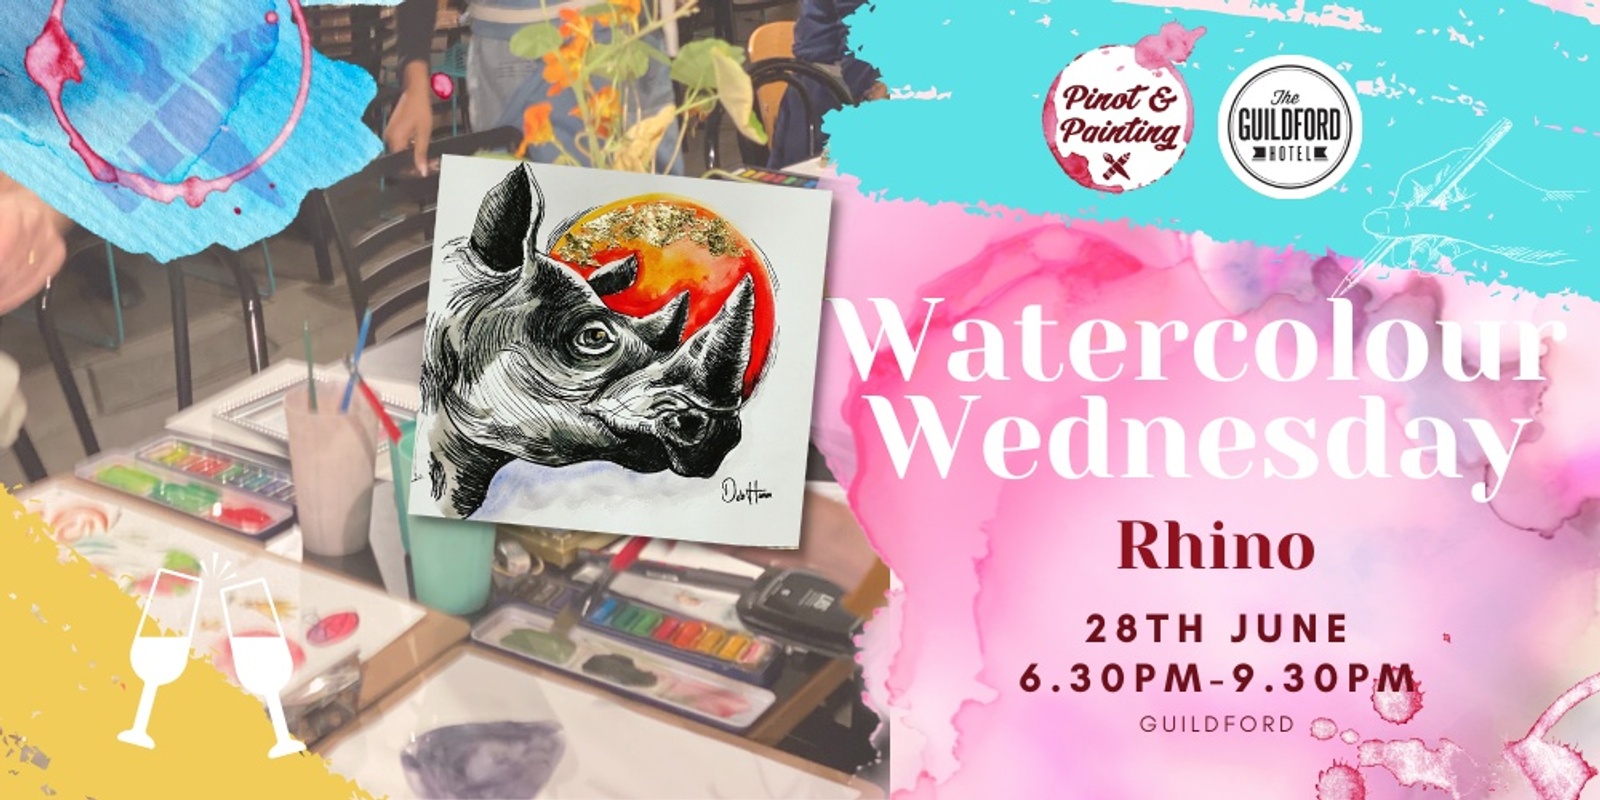 Rhino - Watercolour Wednesday @ The Guildford Hotel